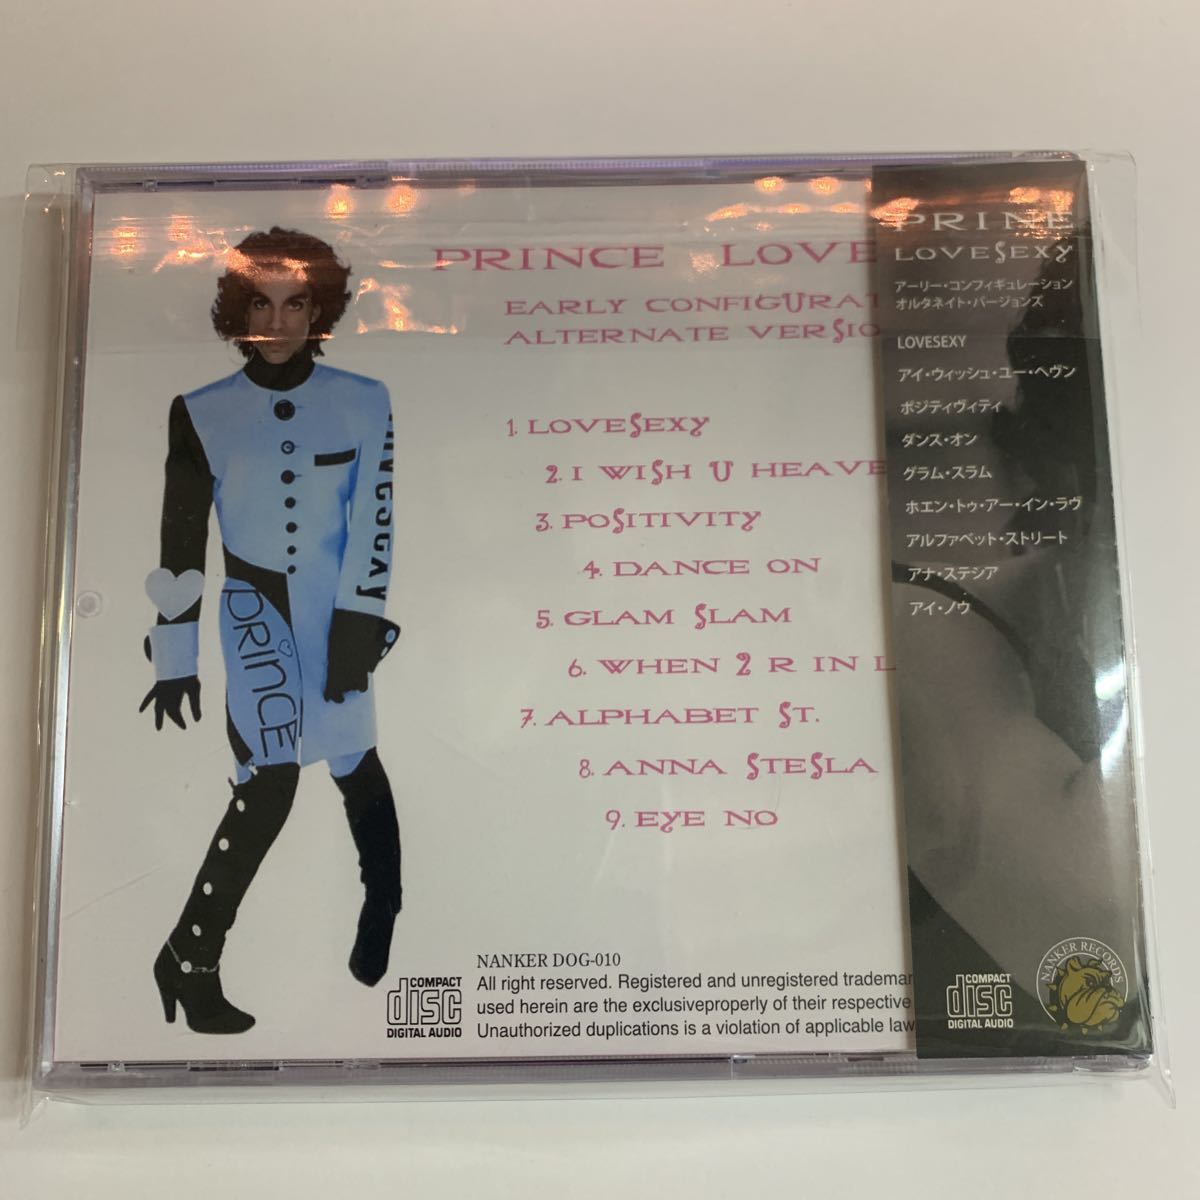 Prince / Lovesexy “Early Configuration Alternate Versions” 神秘のヴェイルを脱ぐプロトタイプ・ラヴセクシー！_画像2